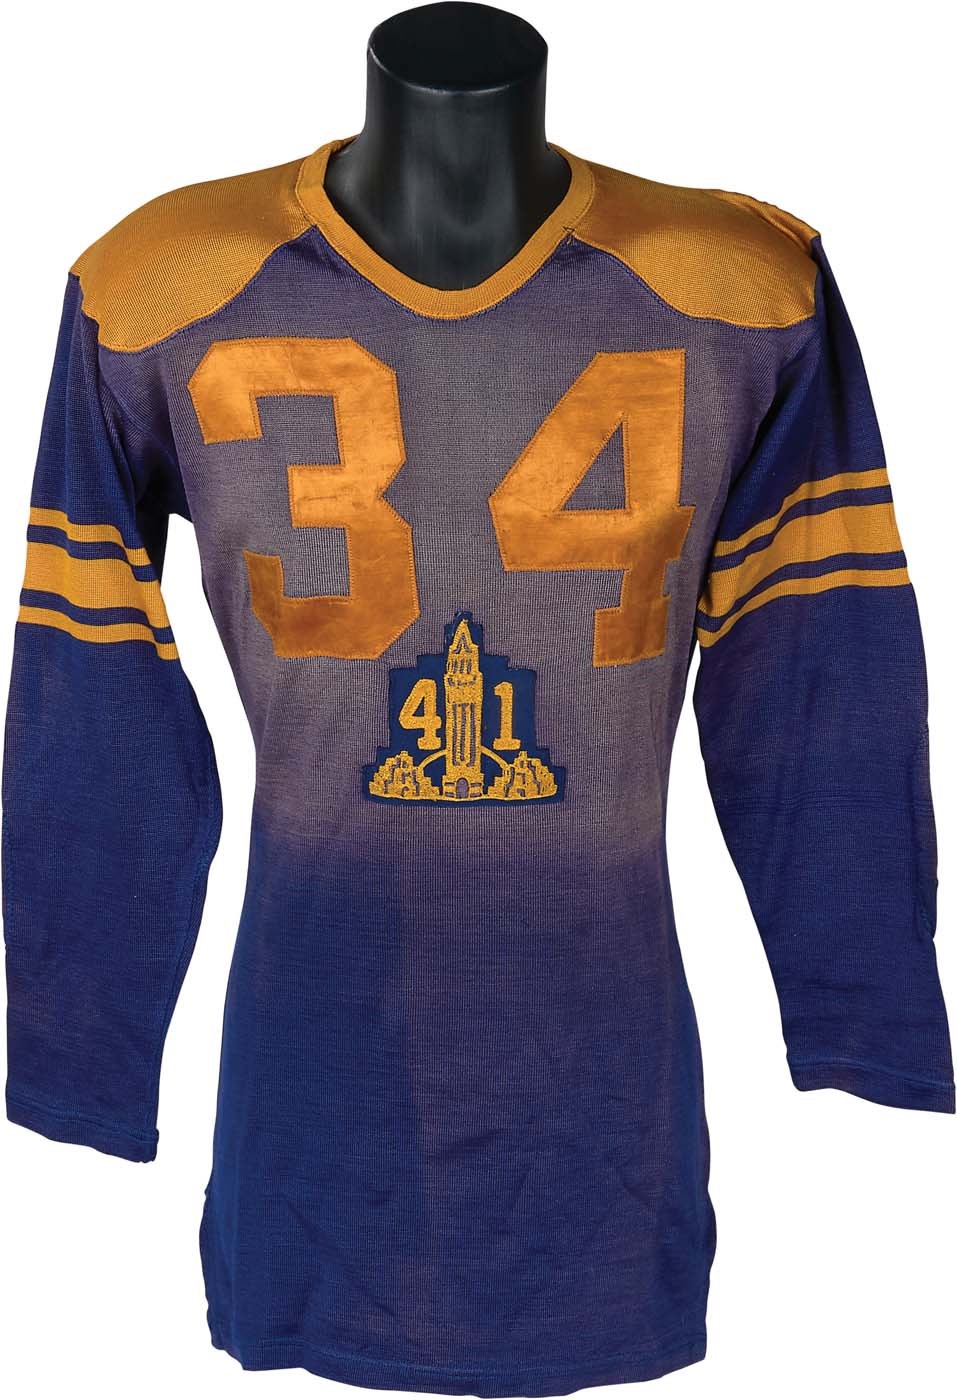 - 1941 College Football Mystery Jersey